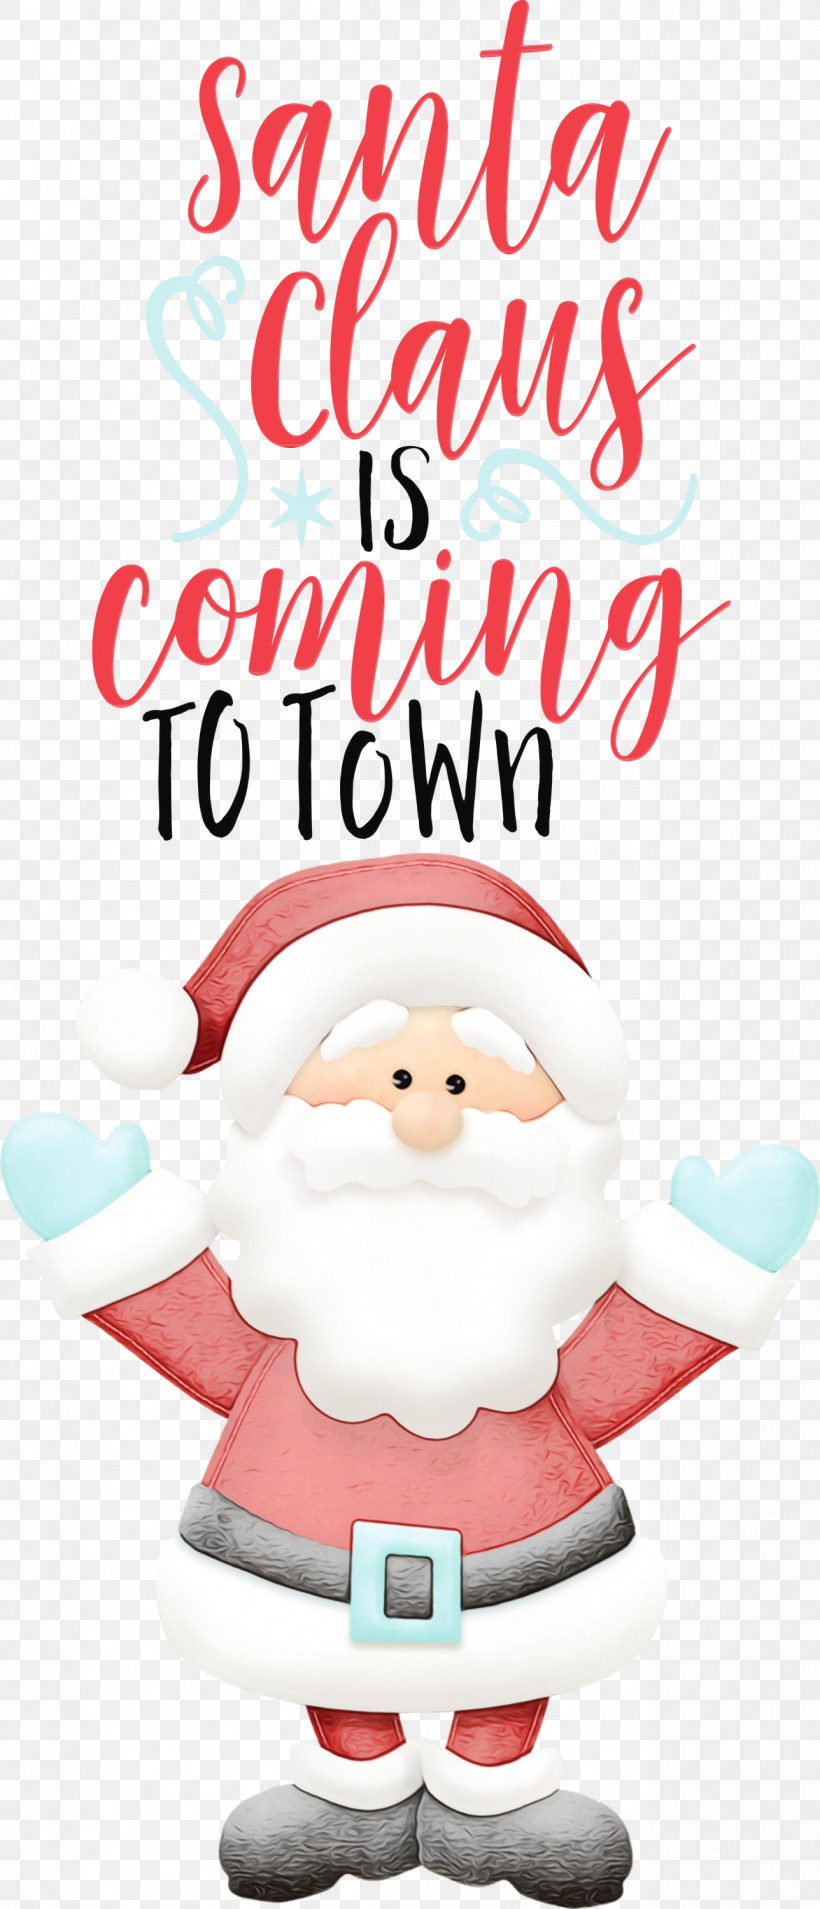 Christmas Day, PNG, 1288x3000px, Santa Claus Is Coming, Cartoon, Christmas, Christmas Day, Christmas Ornament Download Free